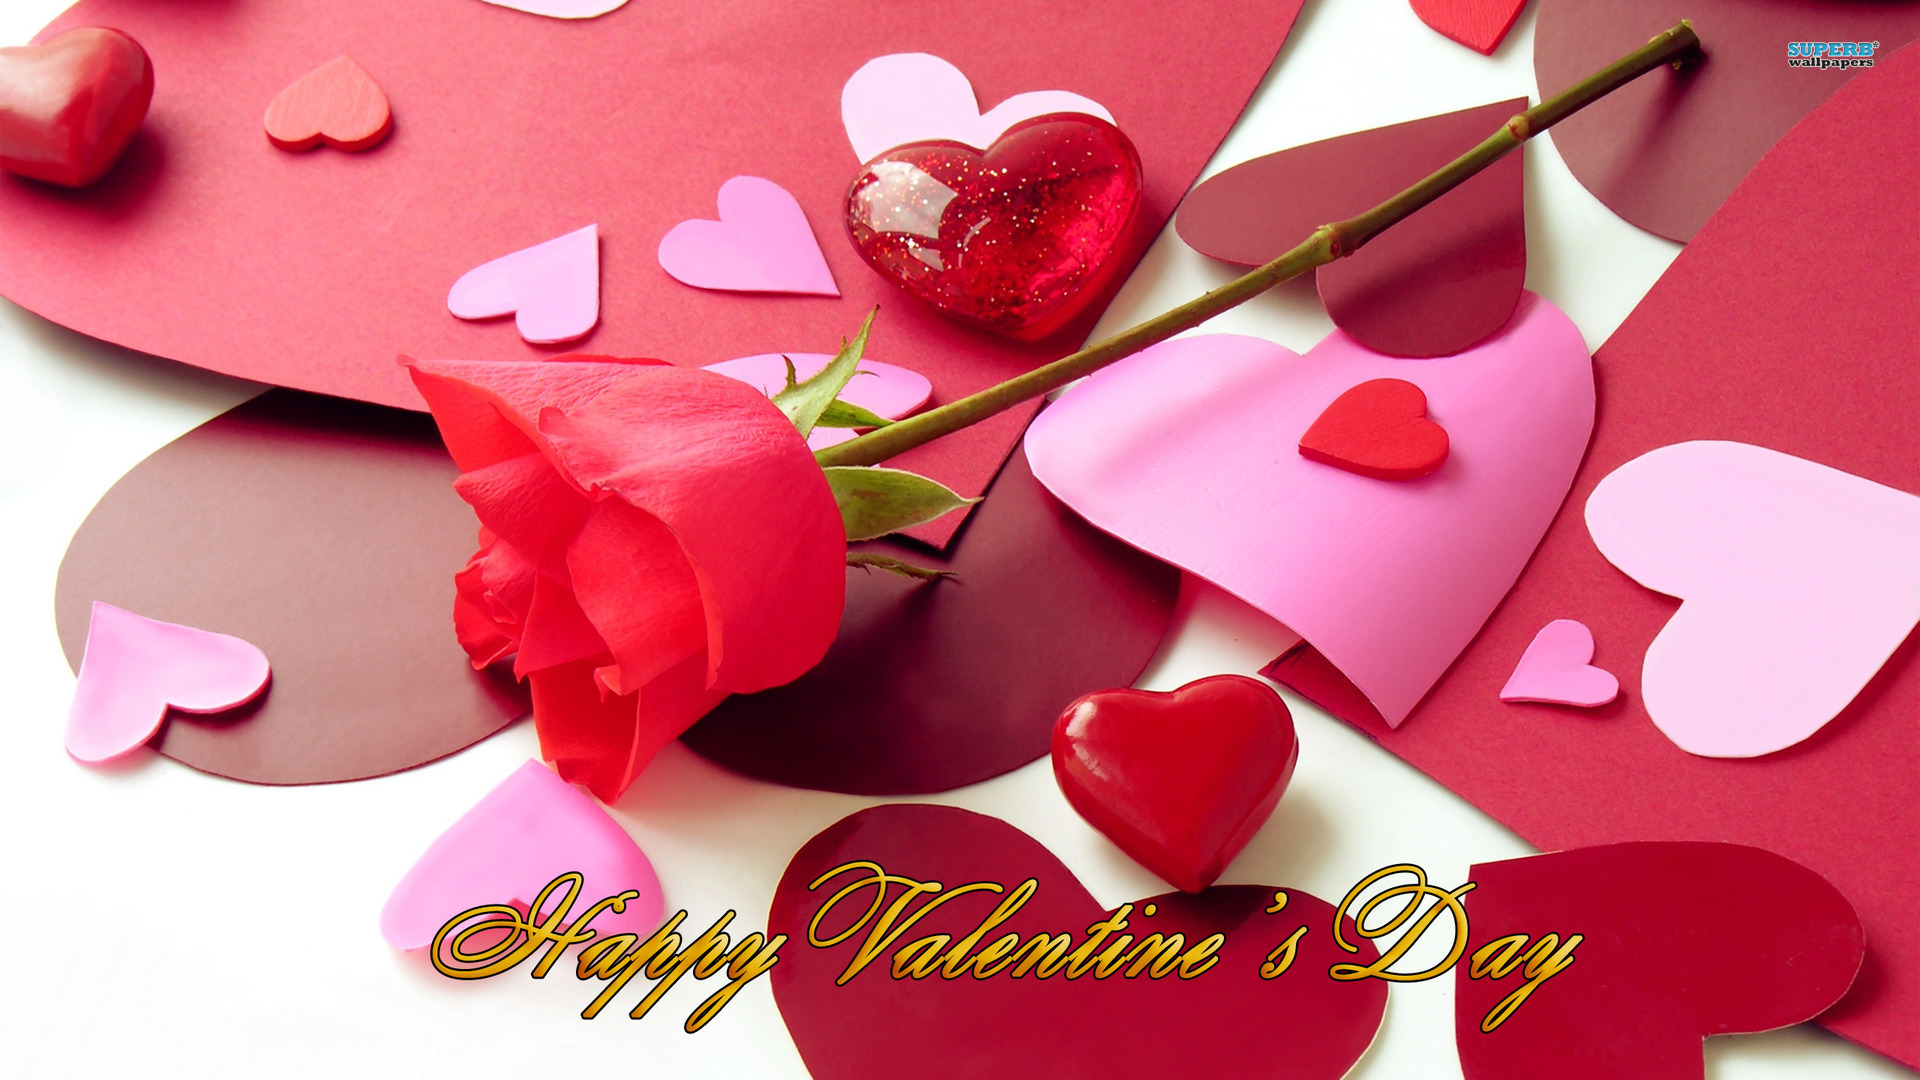 valentinesday special images 4